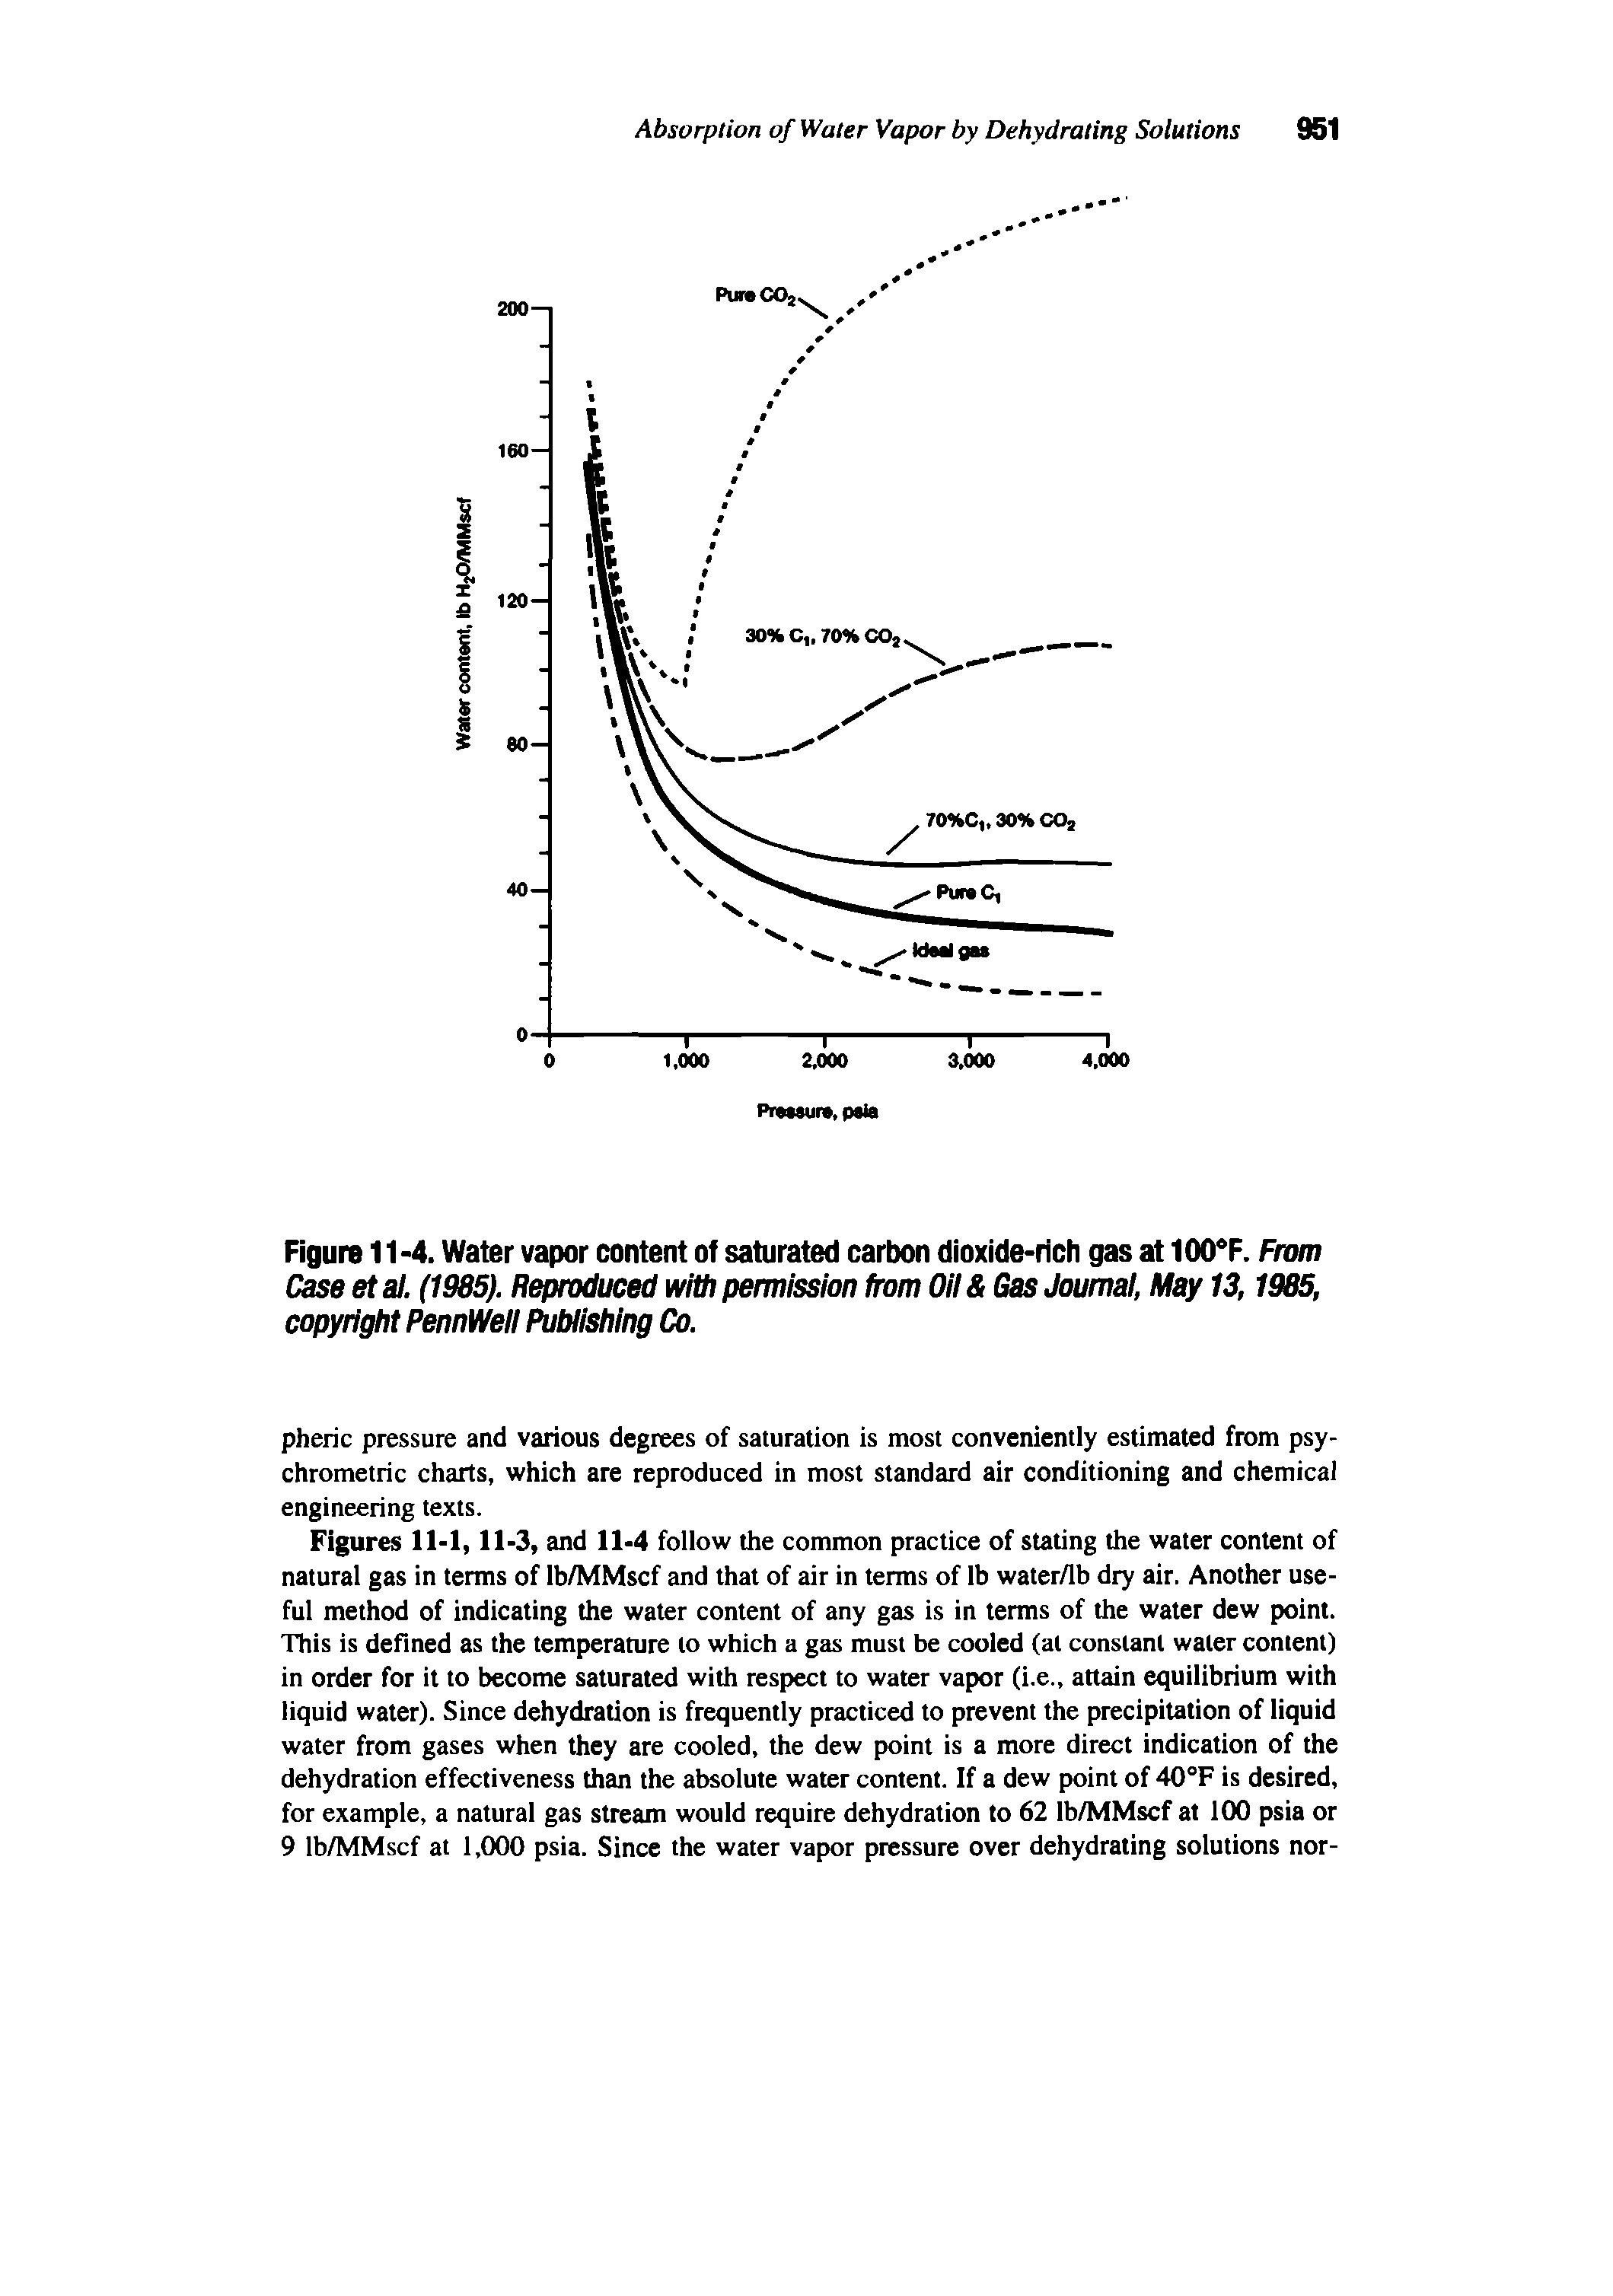 Figures 11-1,11-3, and 11-4 follow the common practice of stating the water content of natural gas in terms of Ib/MMscf and that of air in terms of lb water/lb dry air. Another useful method of indicating the water content of any gas is in terms of the water dew point. This is defined as the temperature to which a gas must be cooled (at constant water content) in order for it to become saturated with respect to water vapor (i.e., attain equilibrium with liquid water). Since dehydration is frequently practiced to prevent the precipitation of liquid water from gases when they are cooled, the dew point is a more direct indication of the dehydration effectiveness than the absolute water content. If a dew point of 40°F is desired, for example, a natural gas stream would require dehydration to 62 Ib/MMscf at 100 psia or 9 Ib/MMscf at 1,000 psia. Since the water vapor pressure over dehydrating solutions nor-...